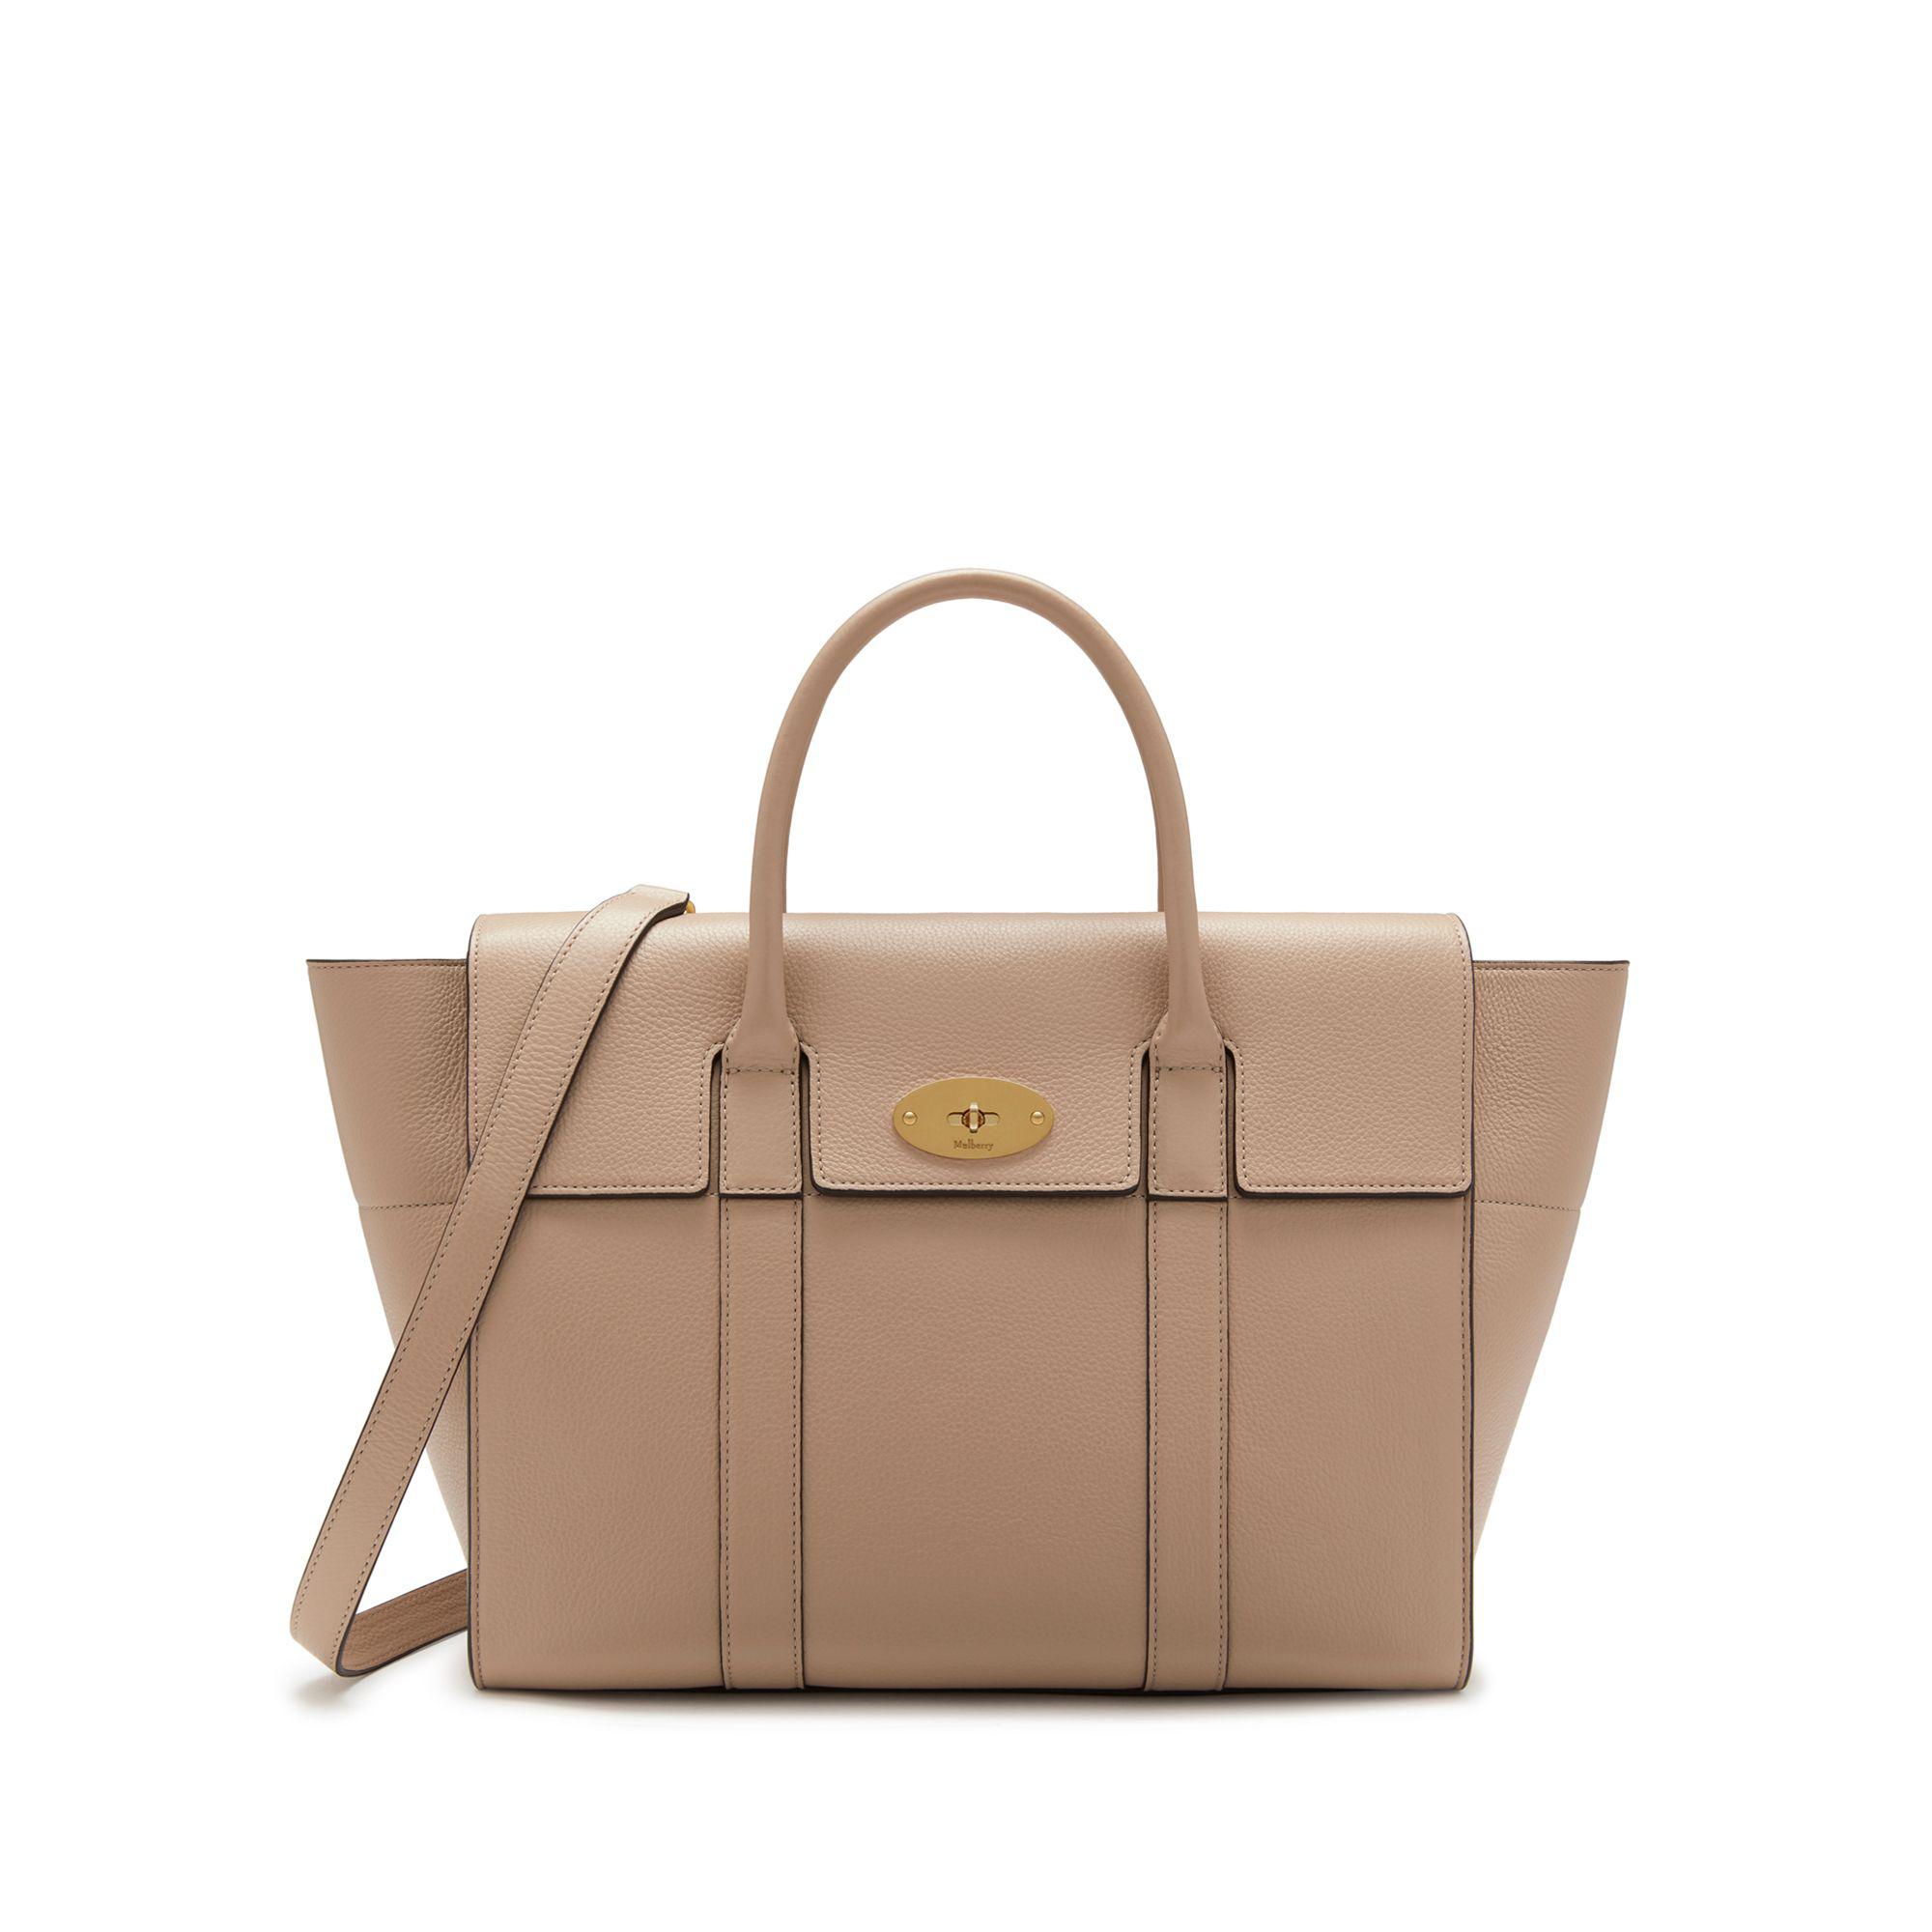 Mulberry Bayswater With Strap In Rosewater Small Classic Grain | Lyst